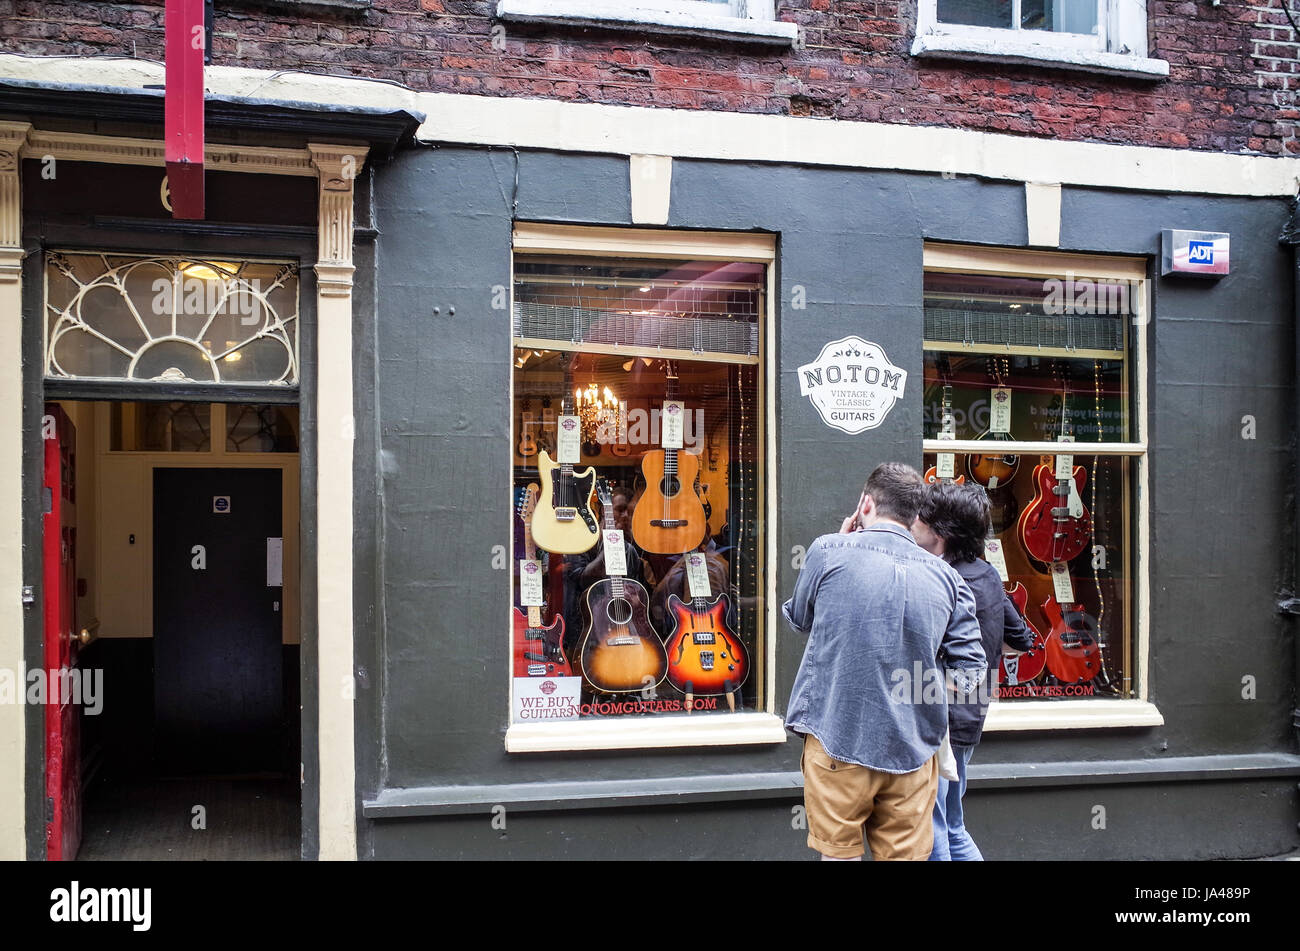 Tin Pan Alley Guitar Shop - Passers by view the vintage guitars for sale in the No.Tom store in historic Denmark Street in central London Stock Photo